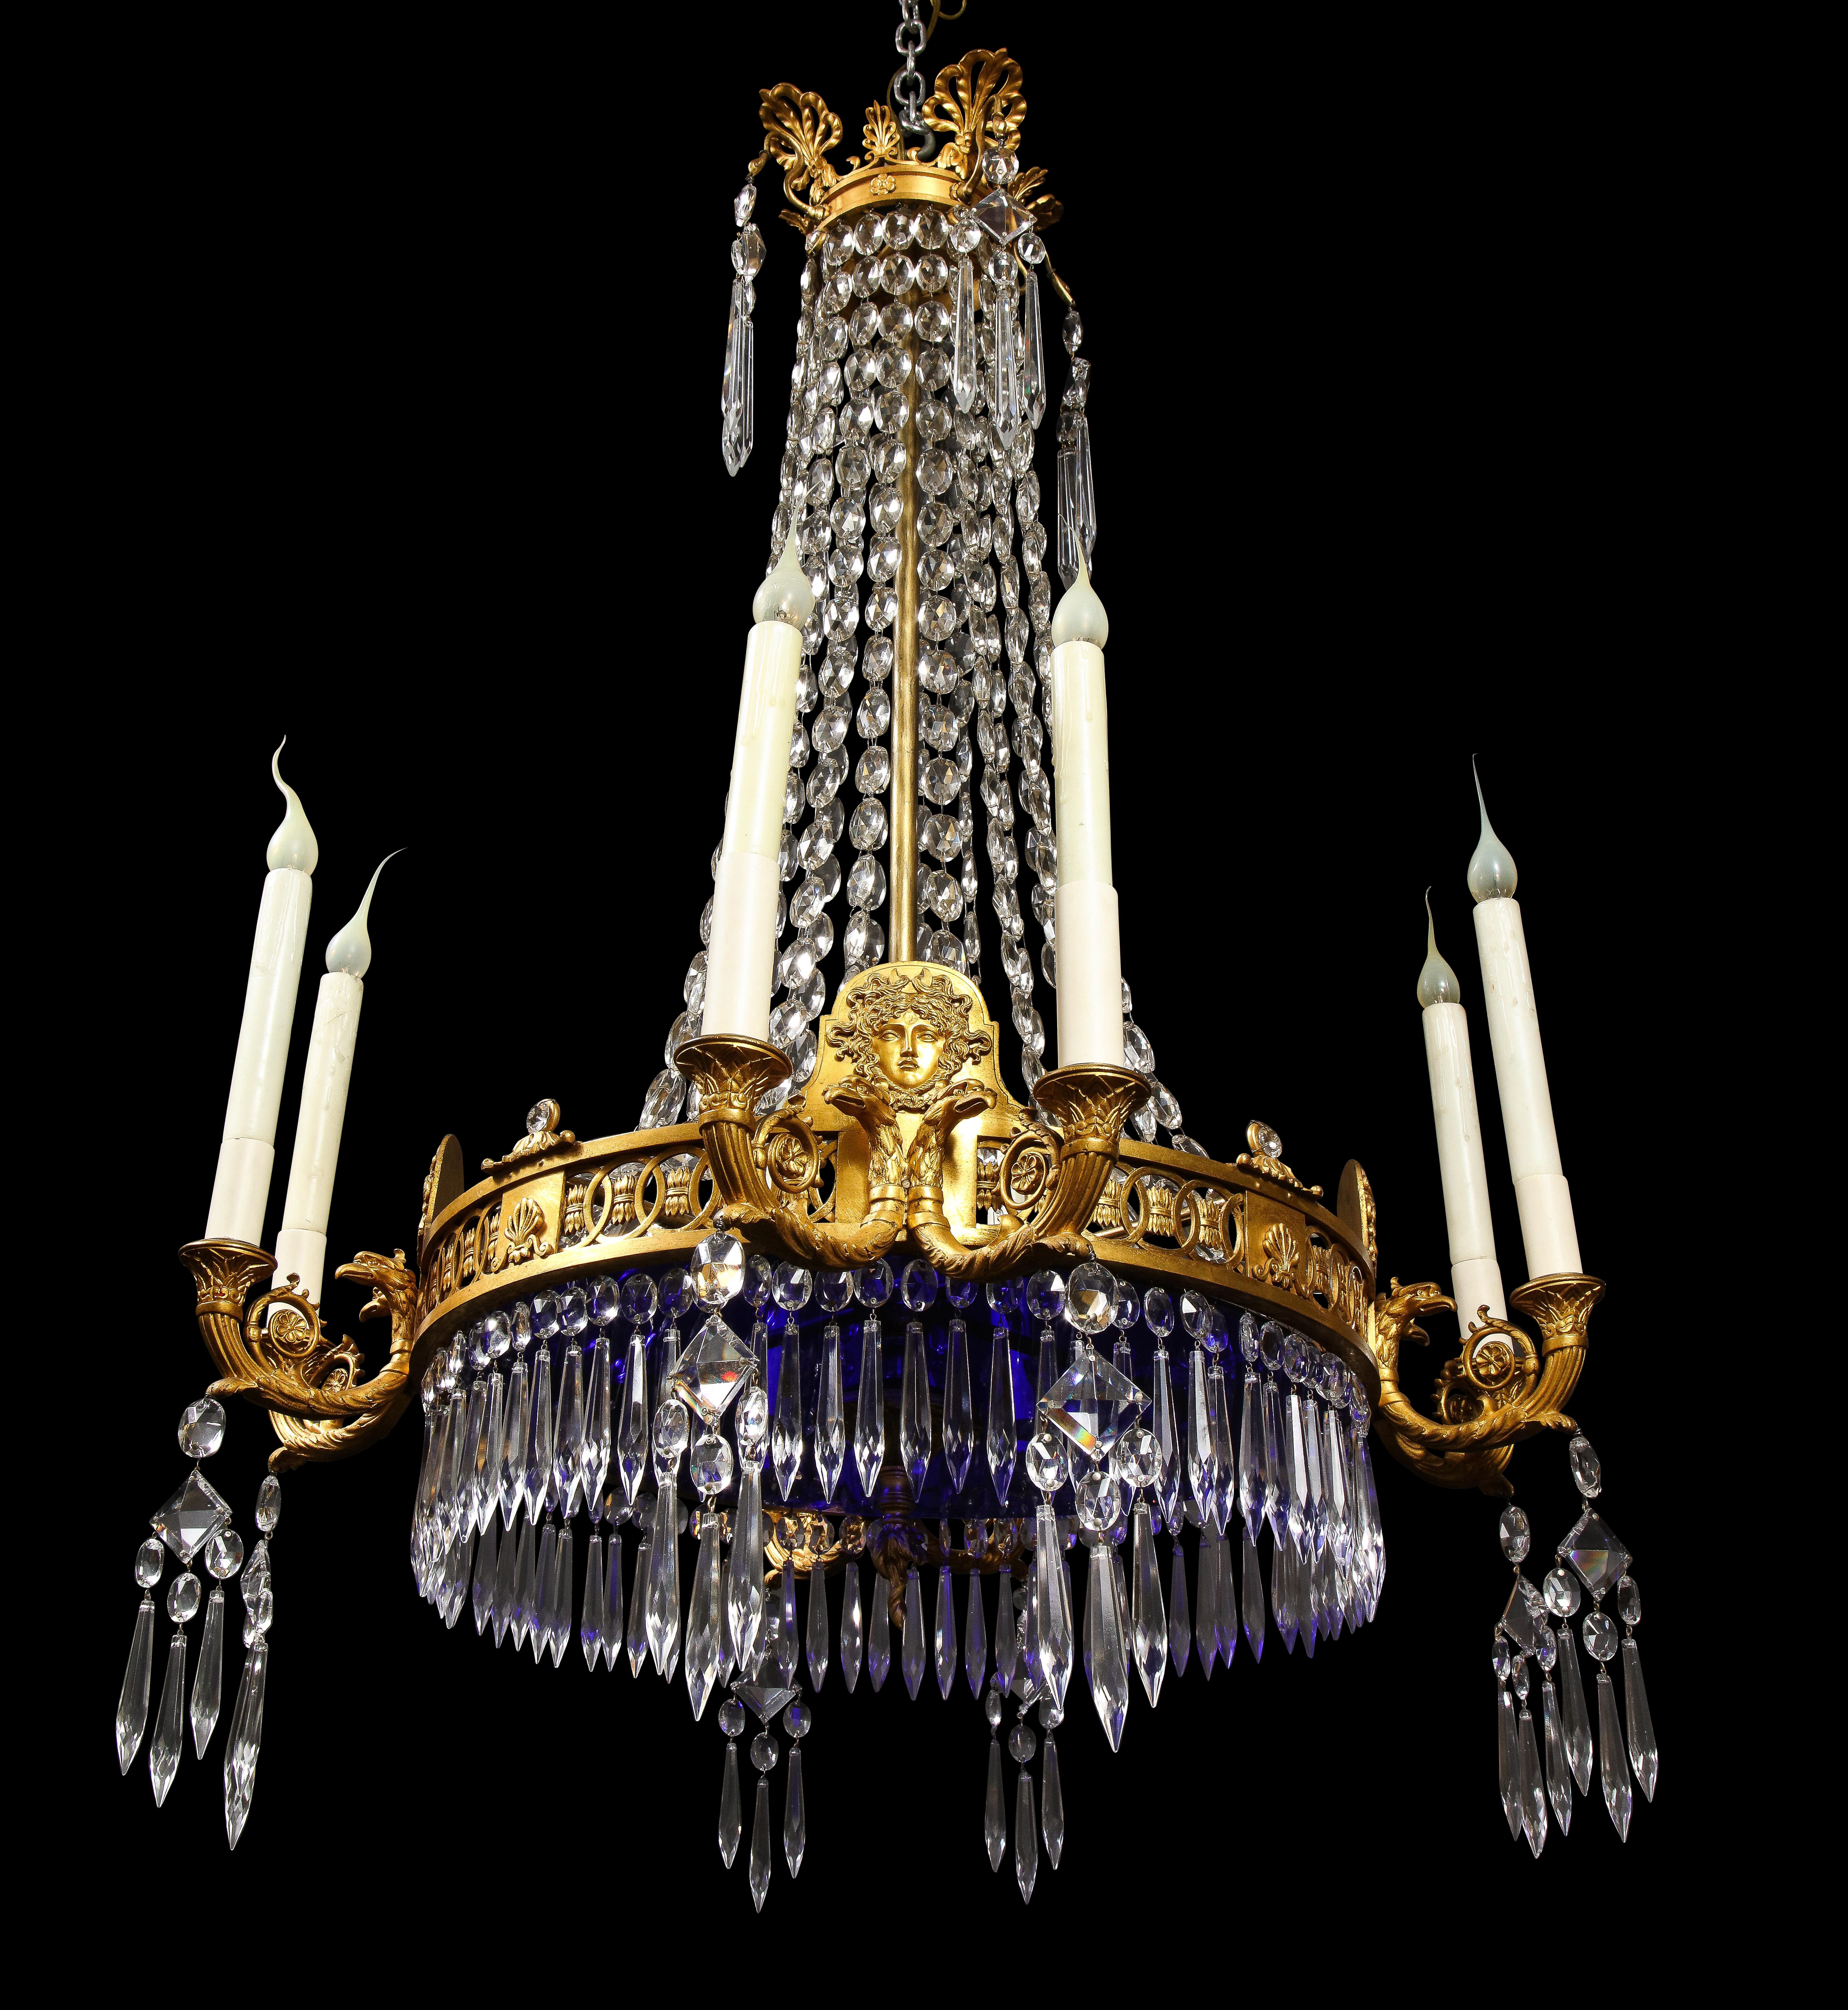 A Fine Large Antique Russian neoclassical gilt bronze, cut crystal and cobalt glass multi light chandelier of great detail embellished with neoclassical figural masks, gilt bronze swans and gilt bronze eagles This fine chandelier is further adorned